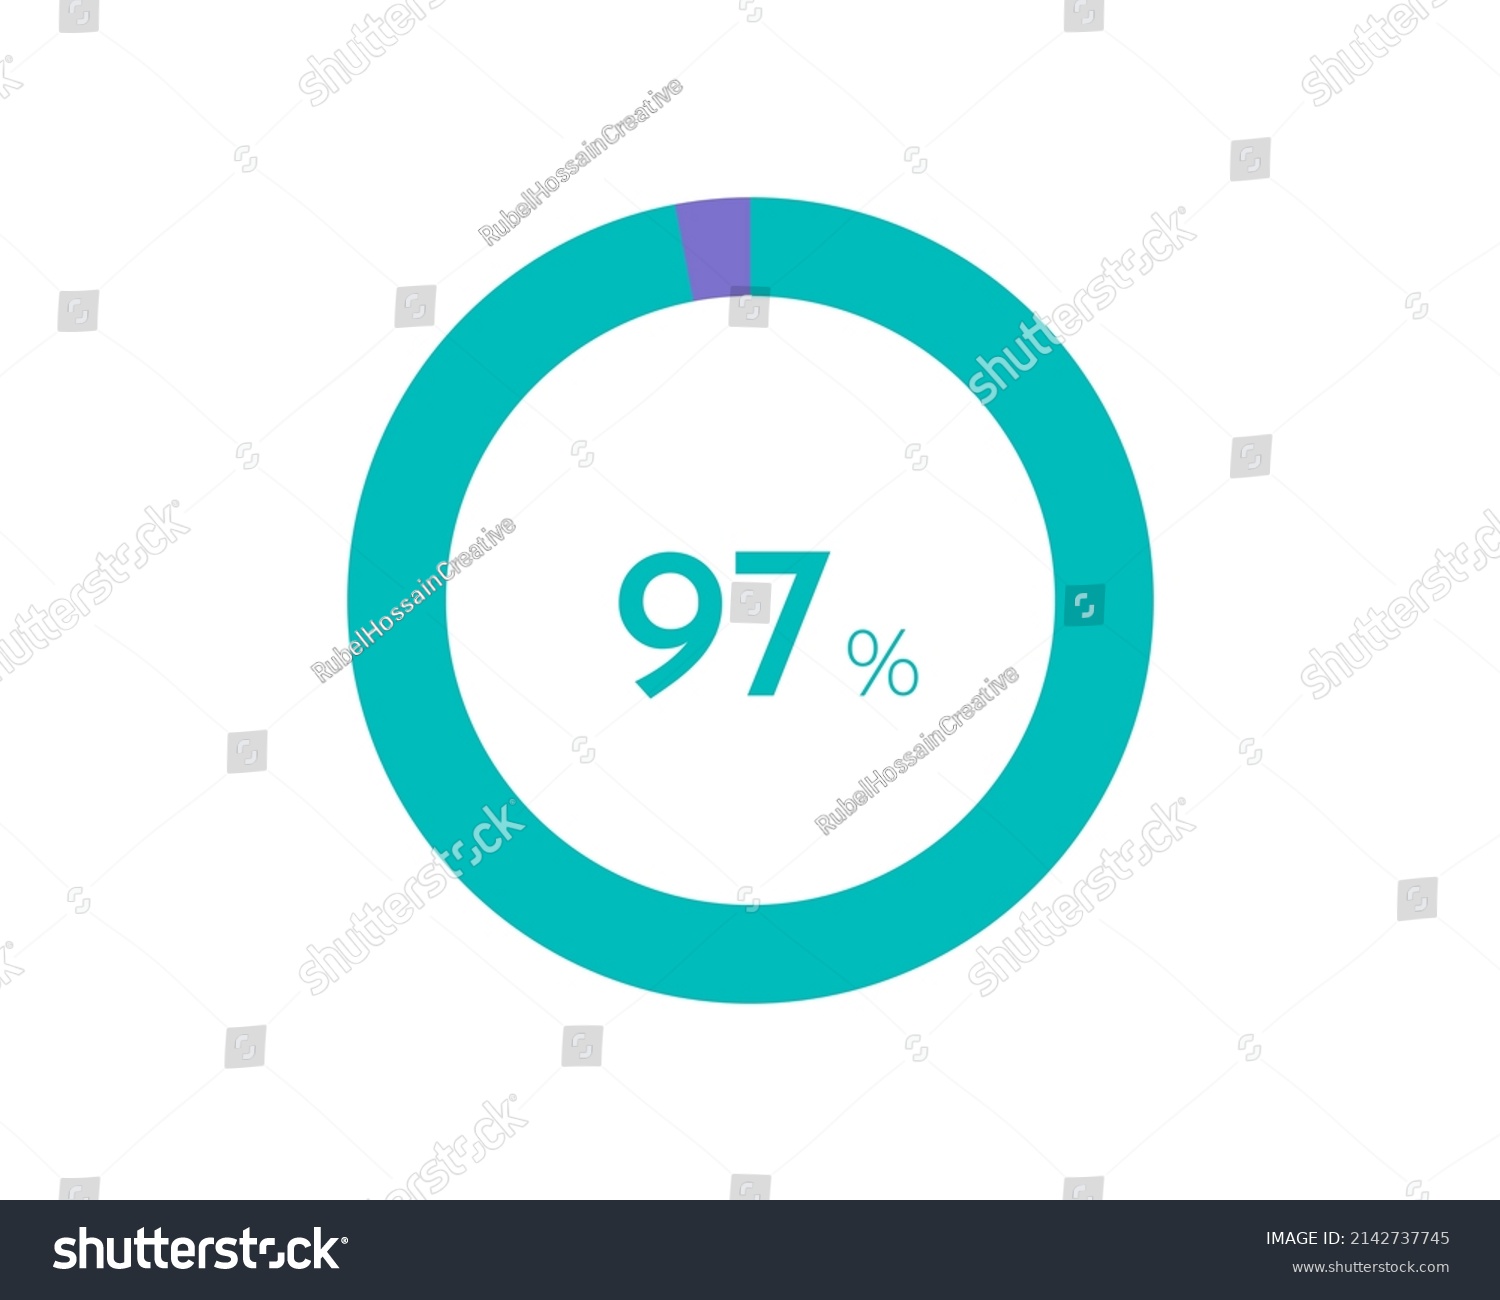 SVG of 97 Percentage pie diagrams on the white background, pie chart for Your documents, reports, 97% circle percentage diagrams for infographics svg